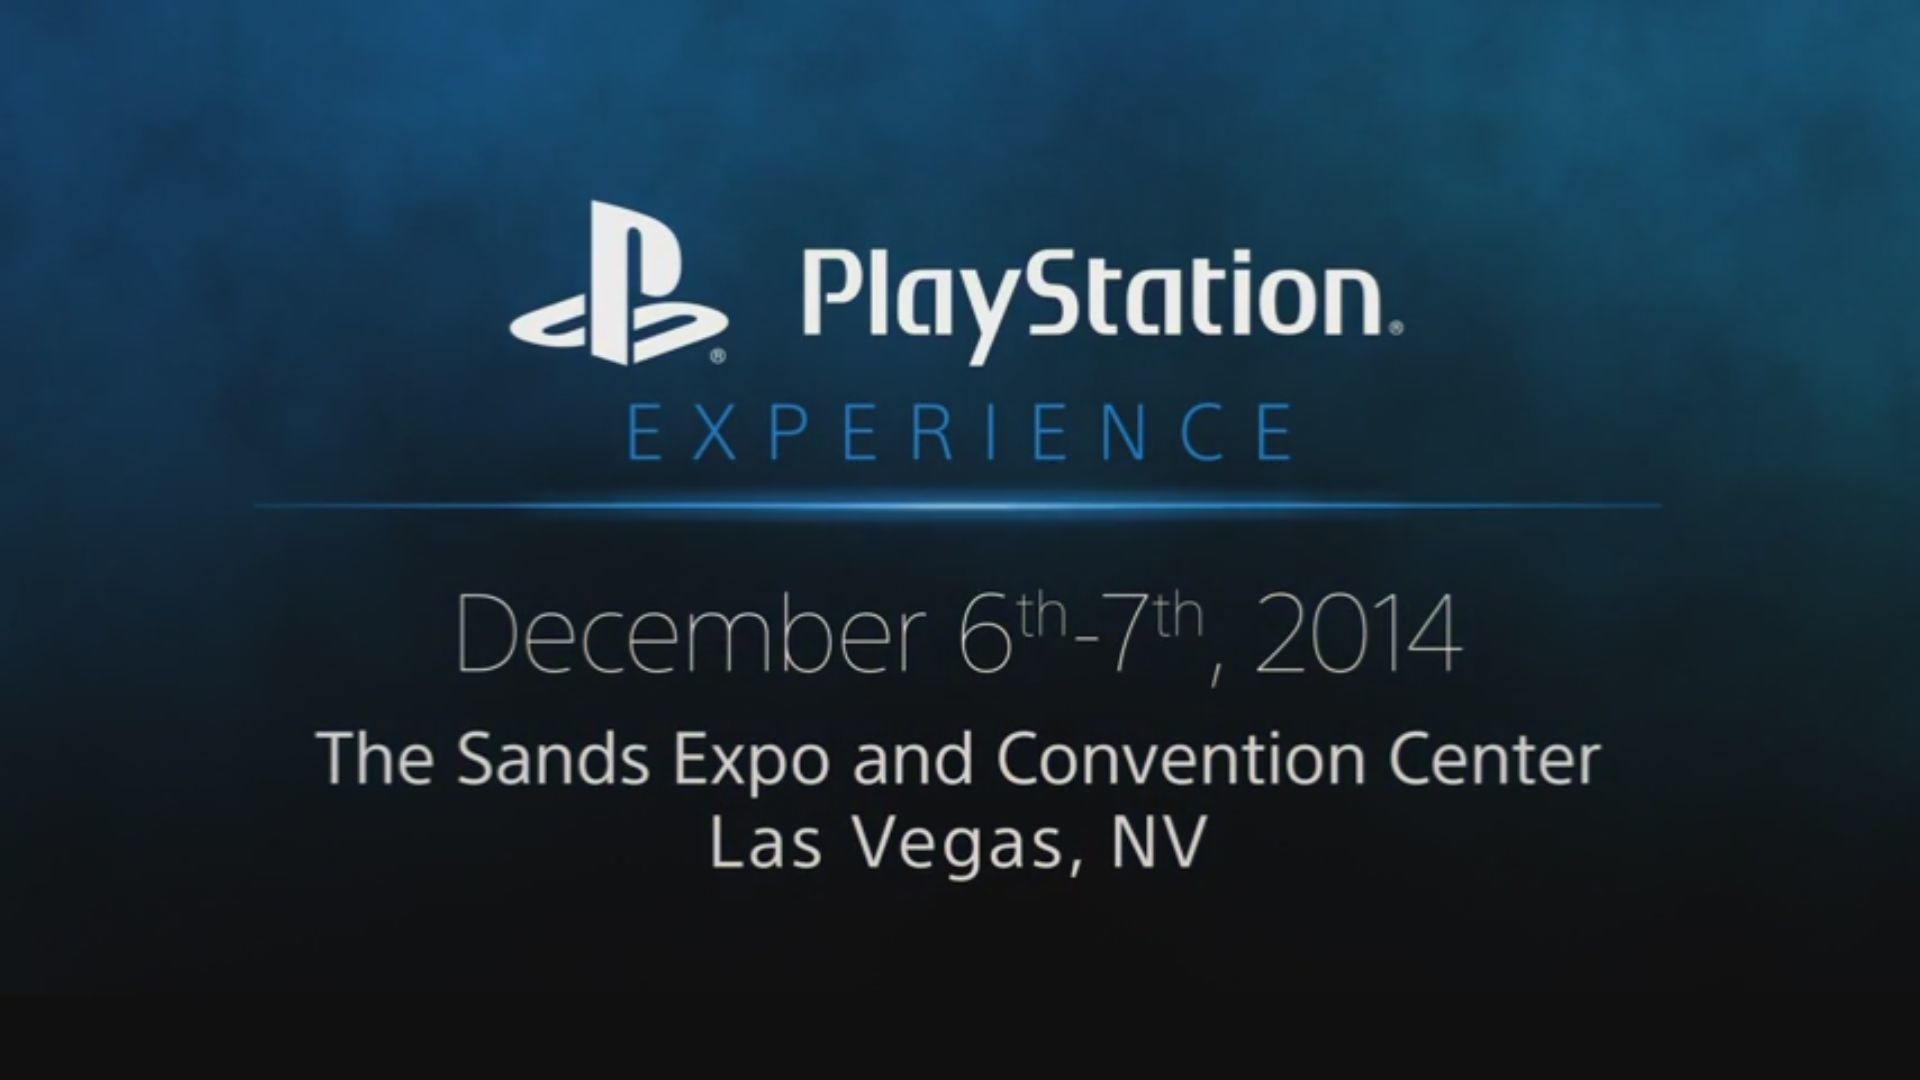 1920x1080 New Info on PlayStation Experience's Games, Developers and Panels Surfaces